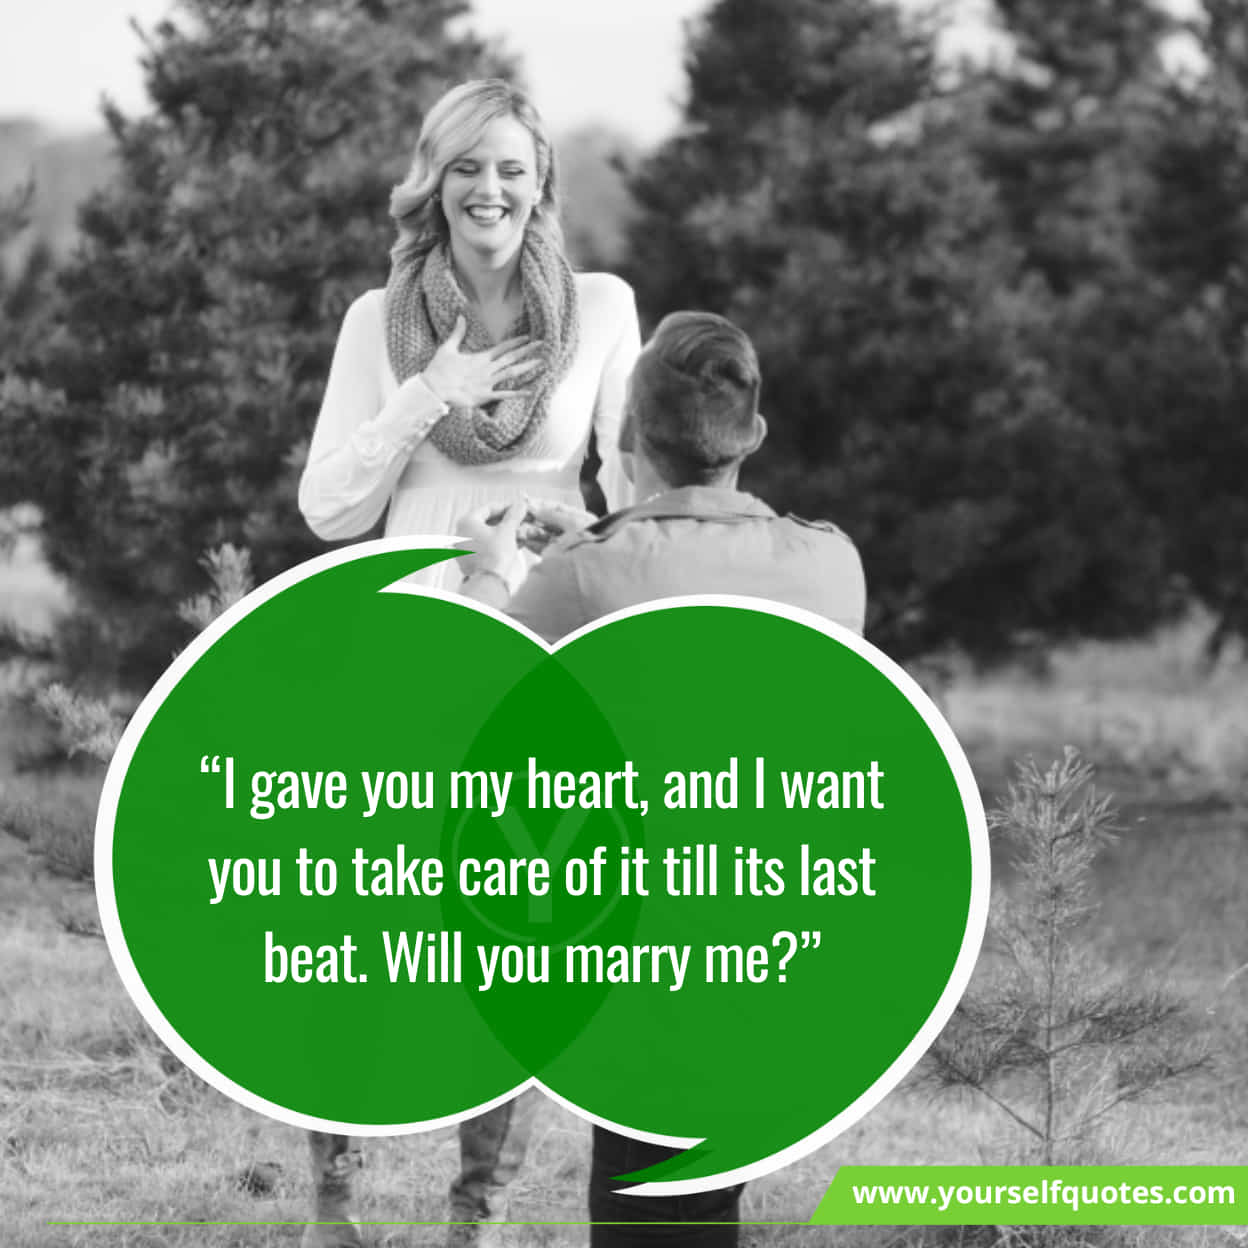 Memorable  Marriage Proposal for Him & Her